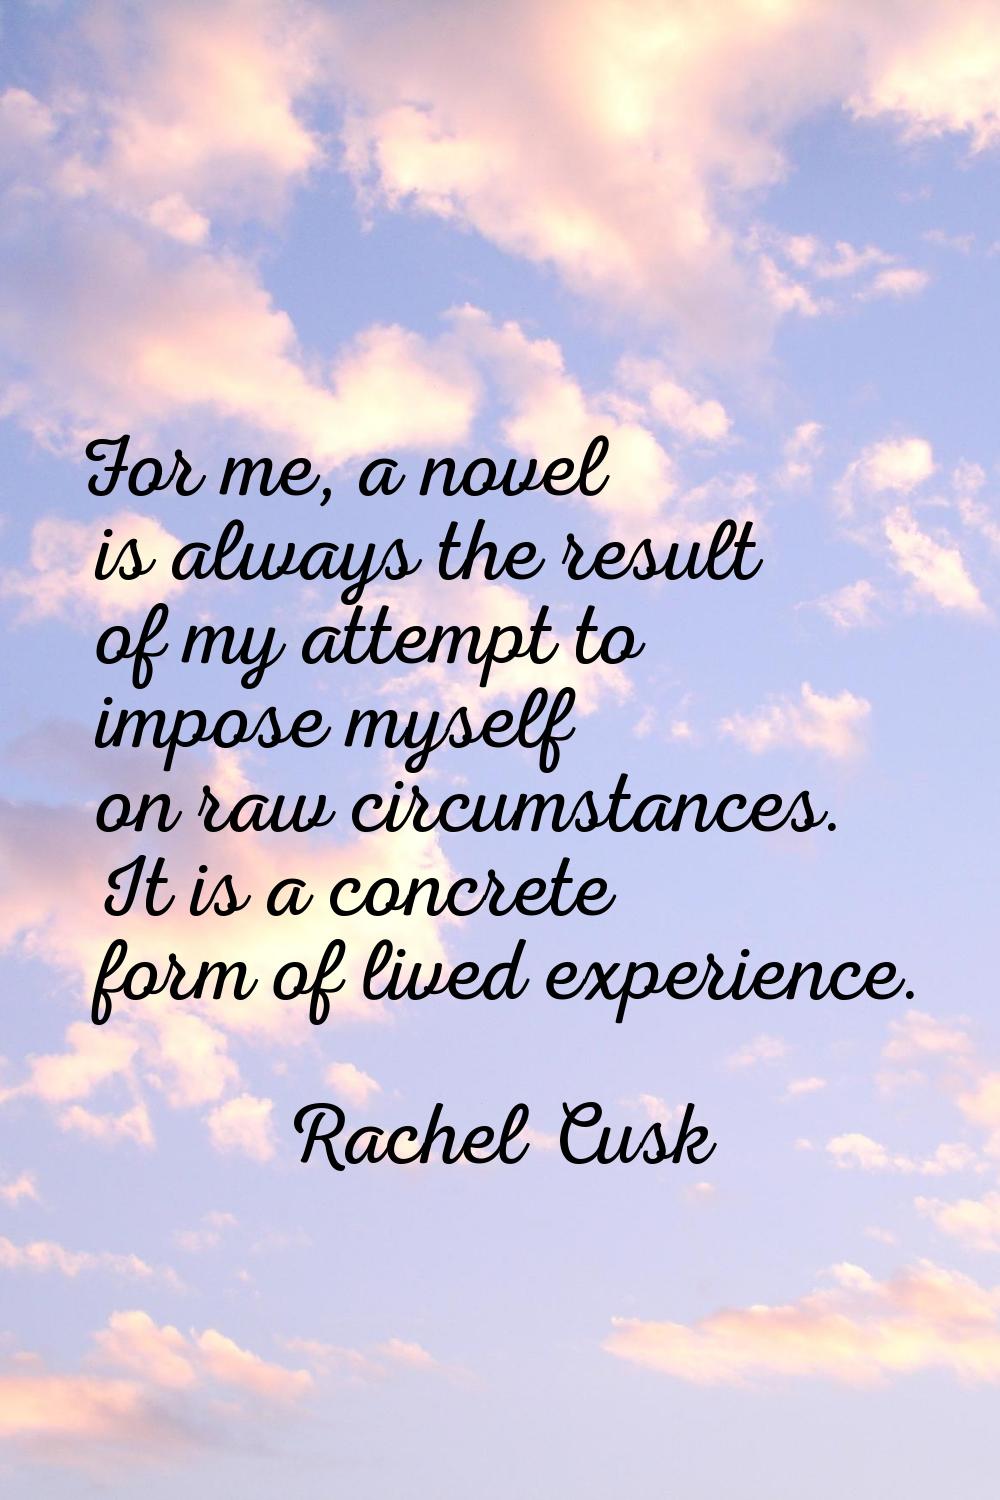 For me, a novel is always the result of my attempt to impose myself on raw circumstances. It is a c